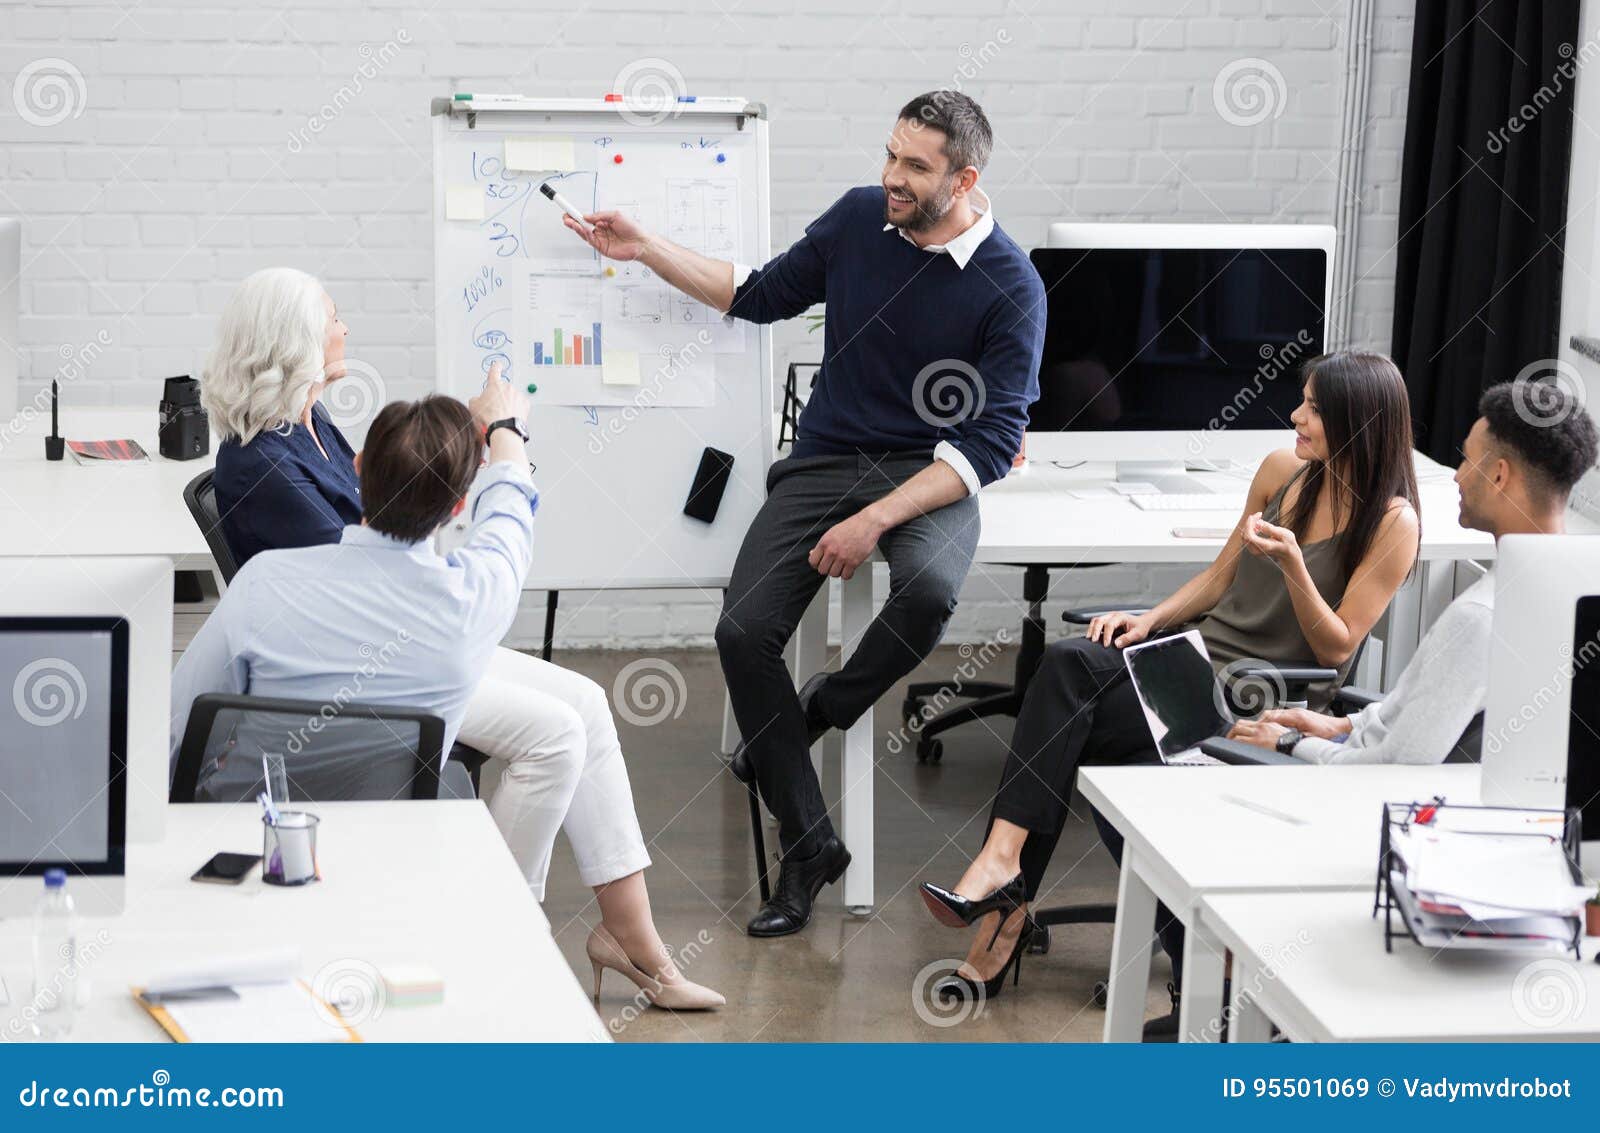 business meeting or a presentation in modern conference room